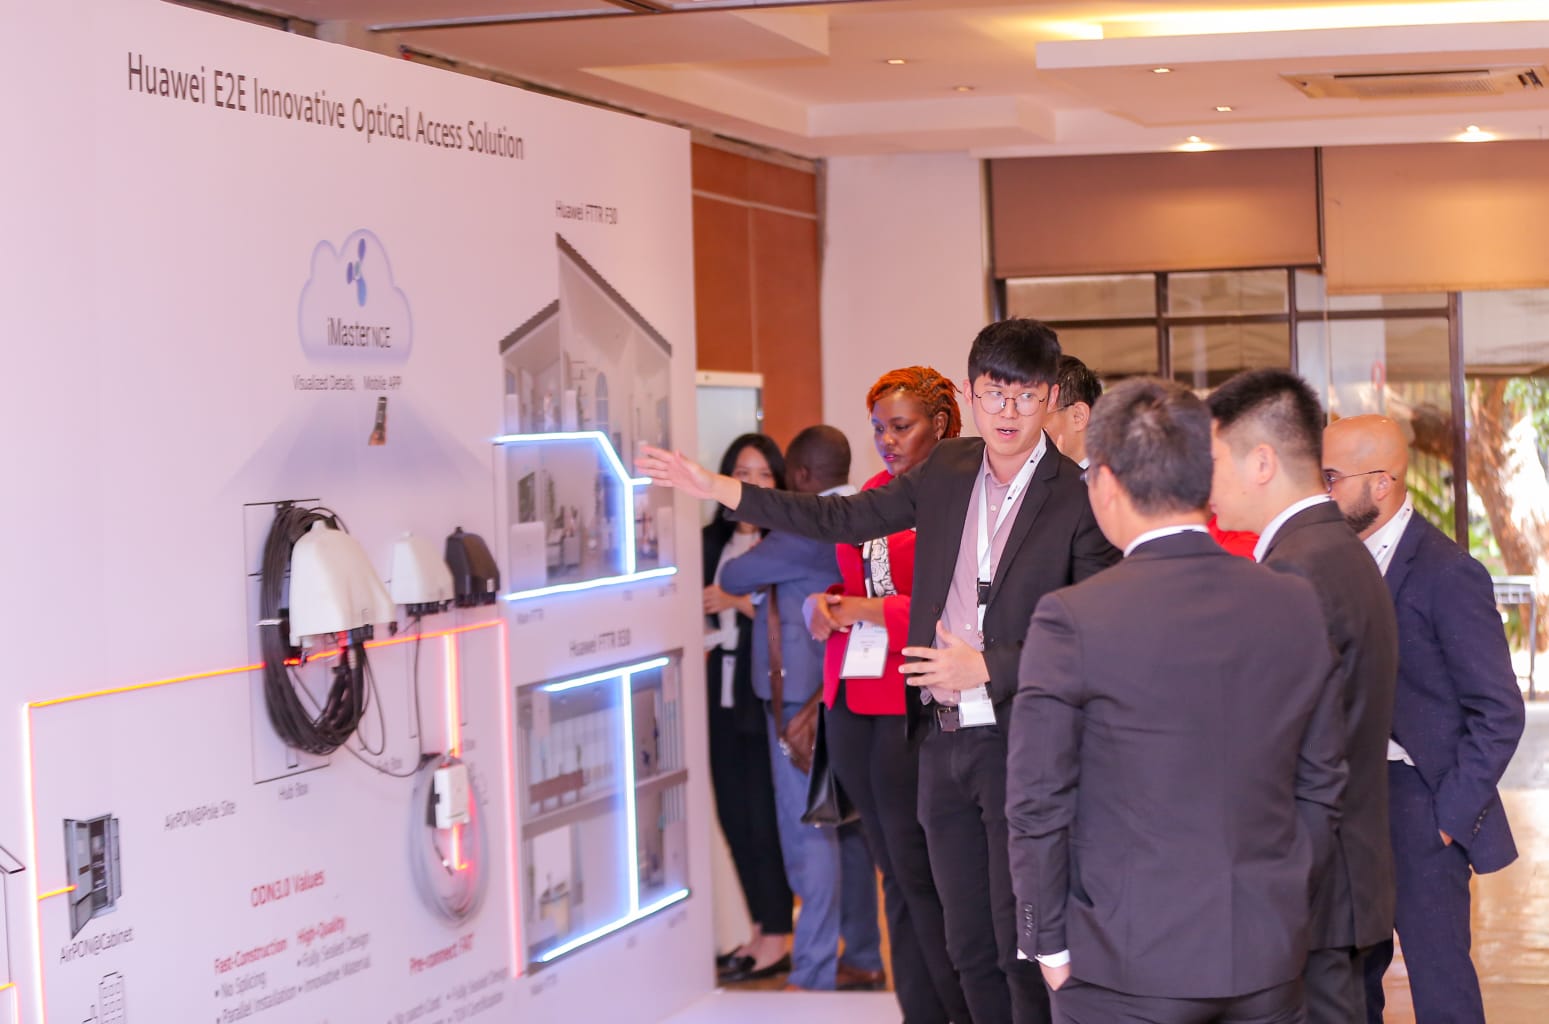 Huawei Kenya has announced that it will step up residential internet fiber and connect more homes to the Internet